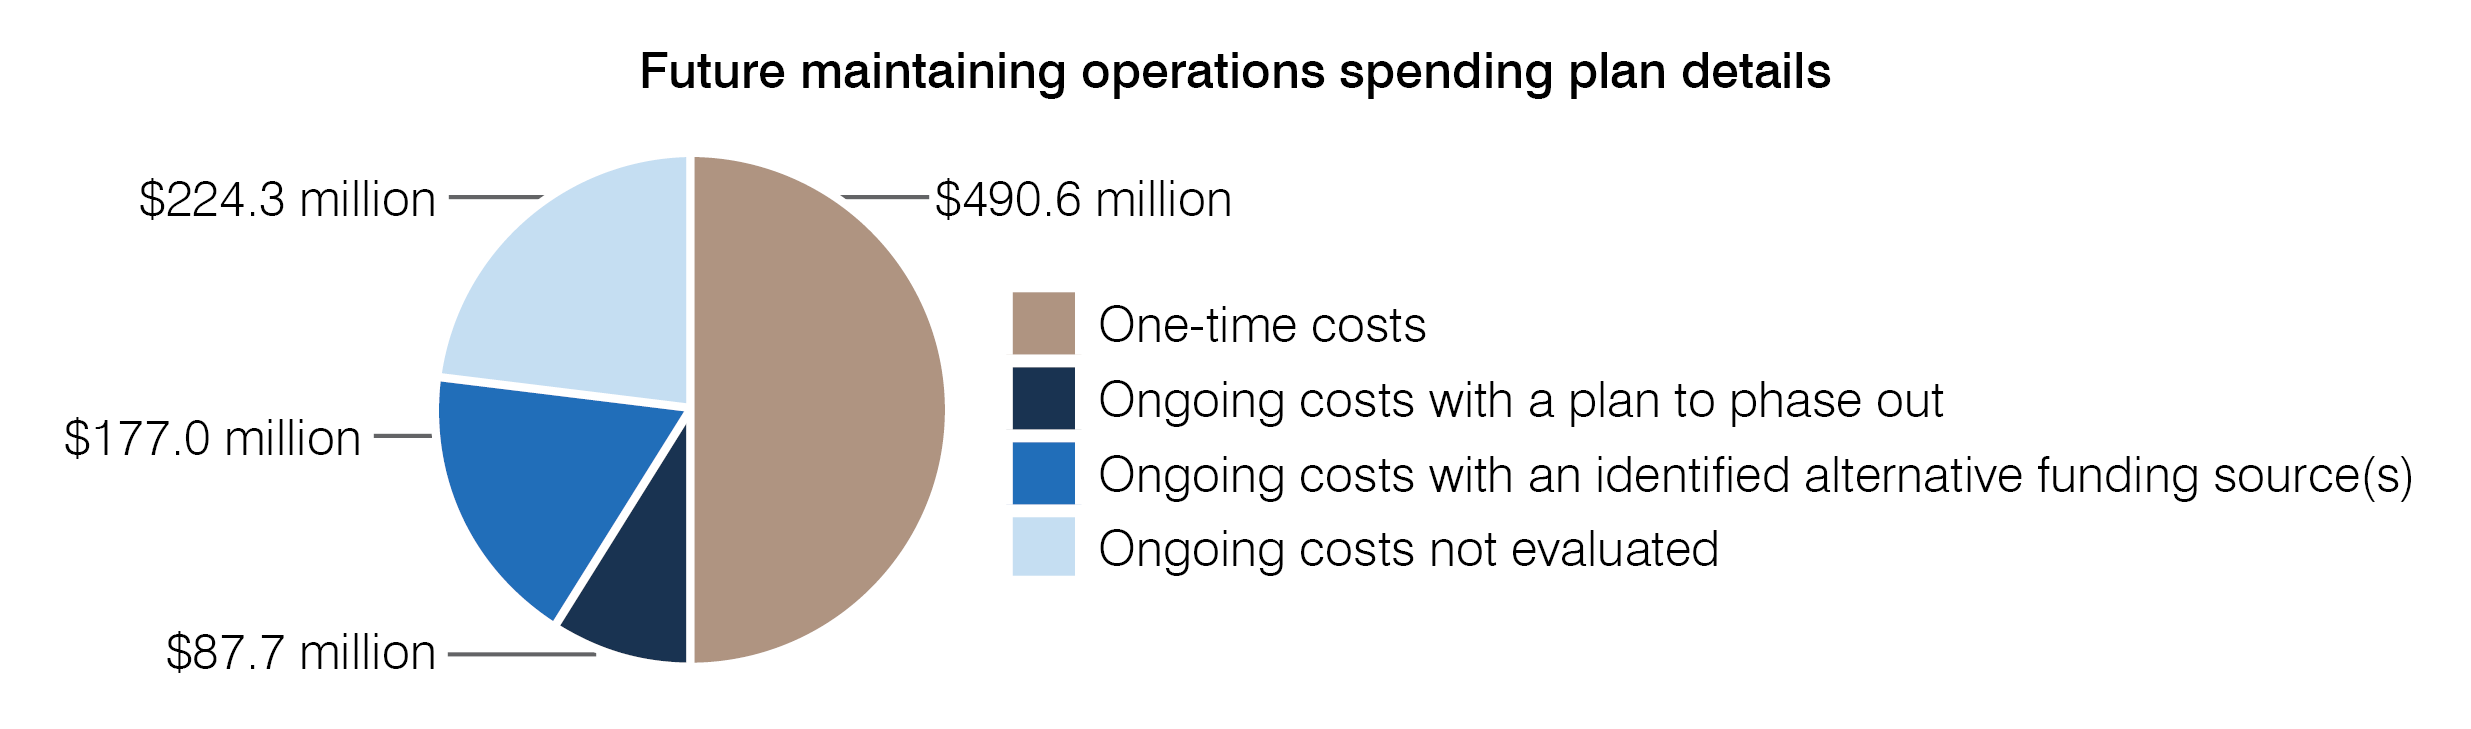 Maintaining operations planned future spending by type